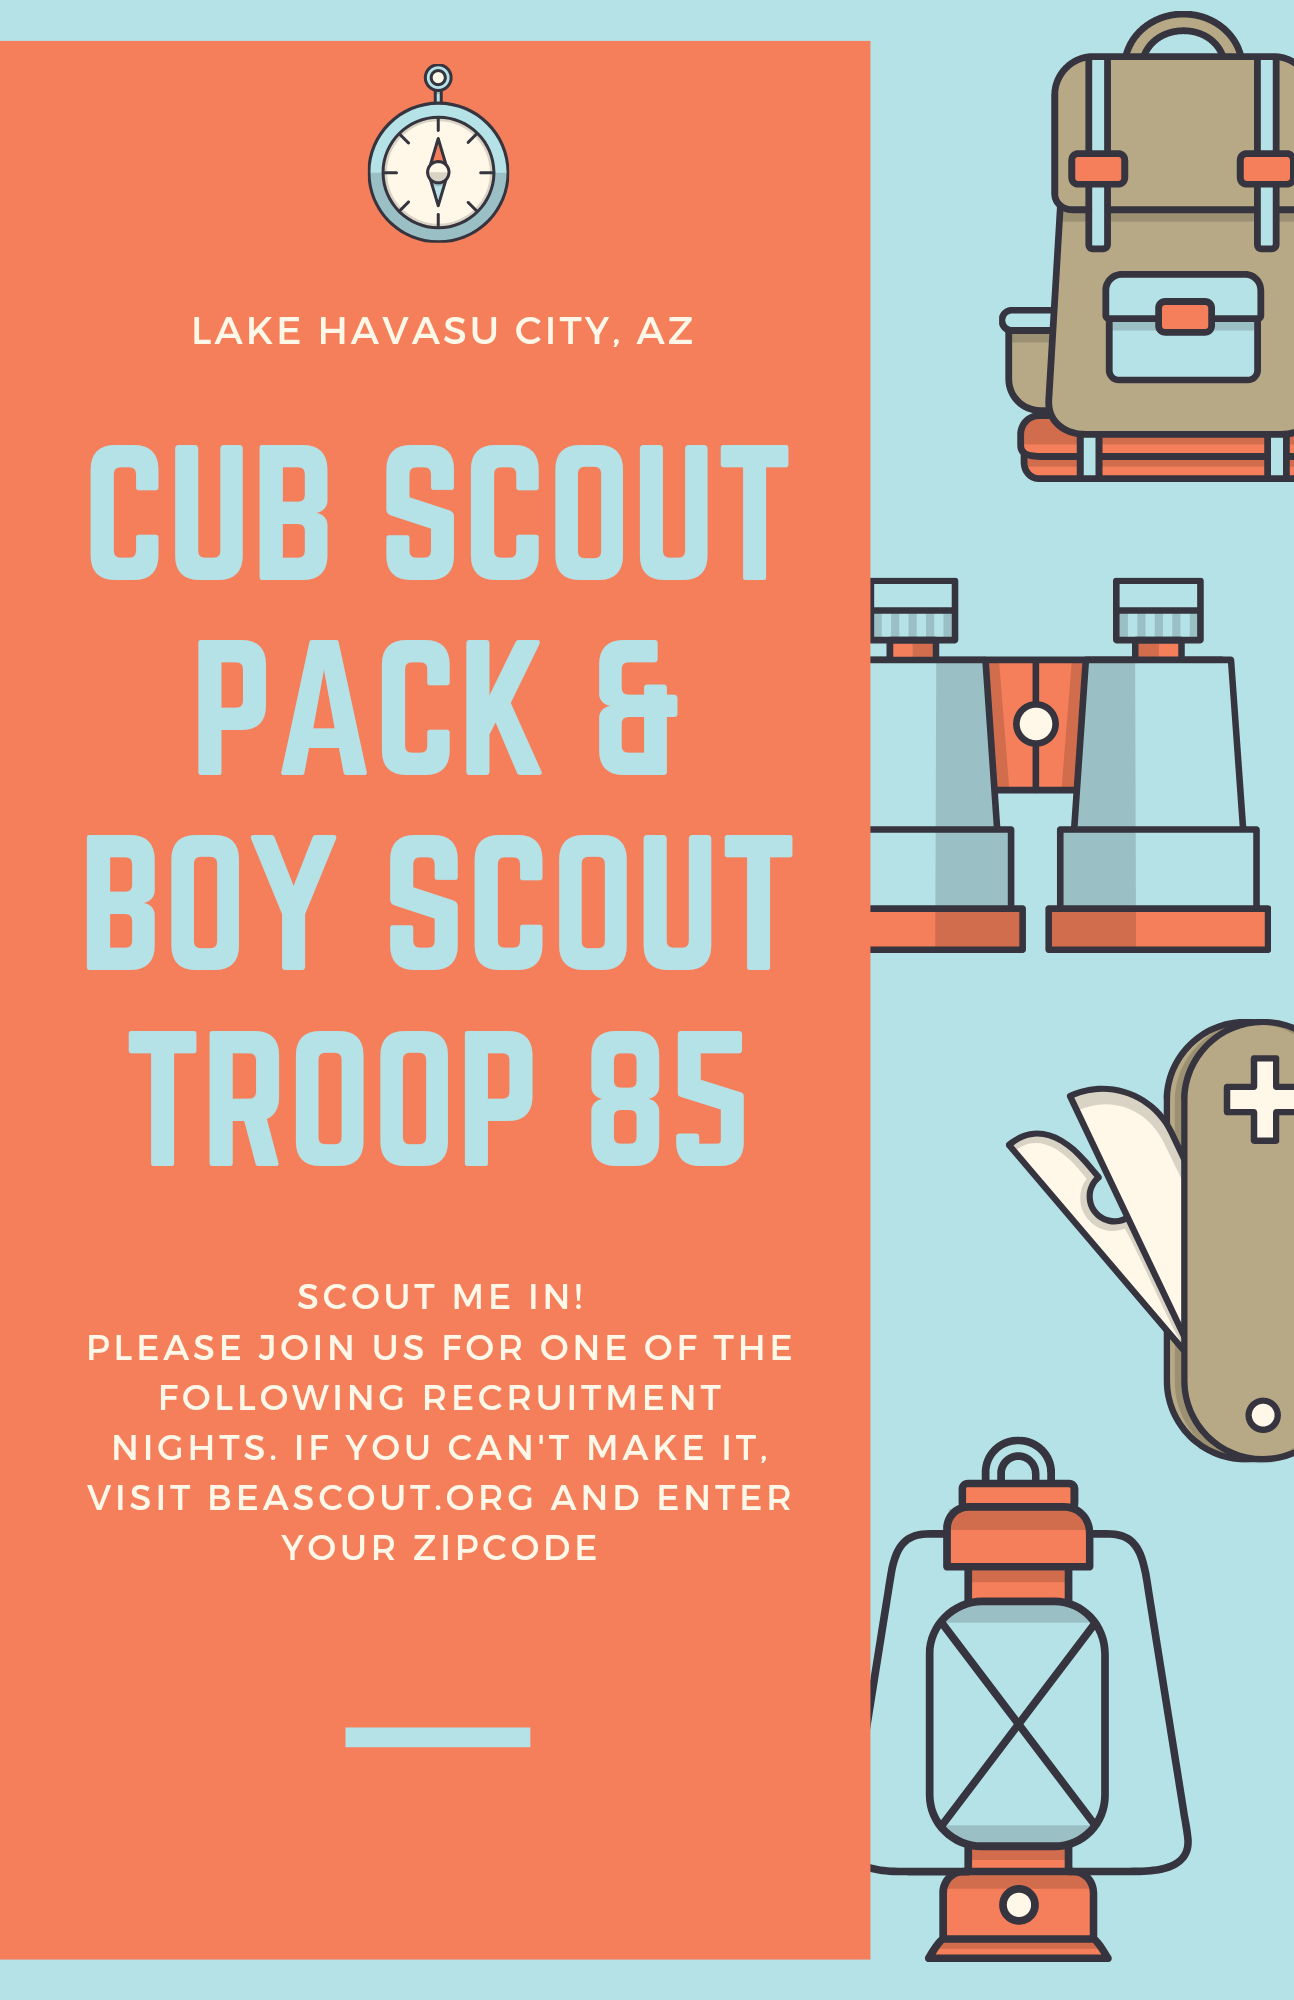 Cub Scout Pack & Boy Scout Troop 85 Recruitment Nights